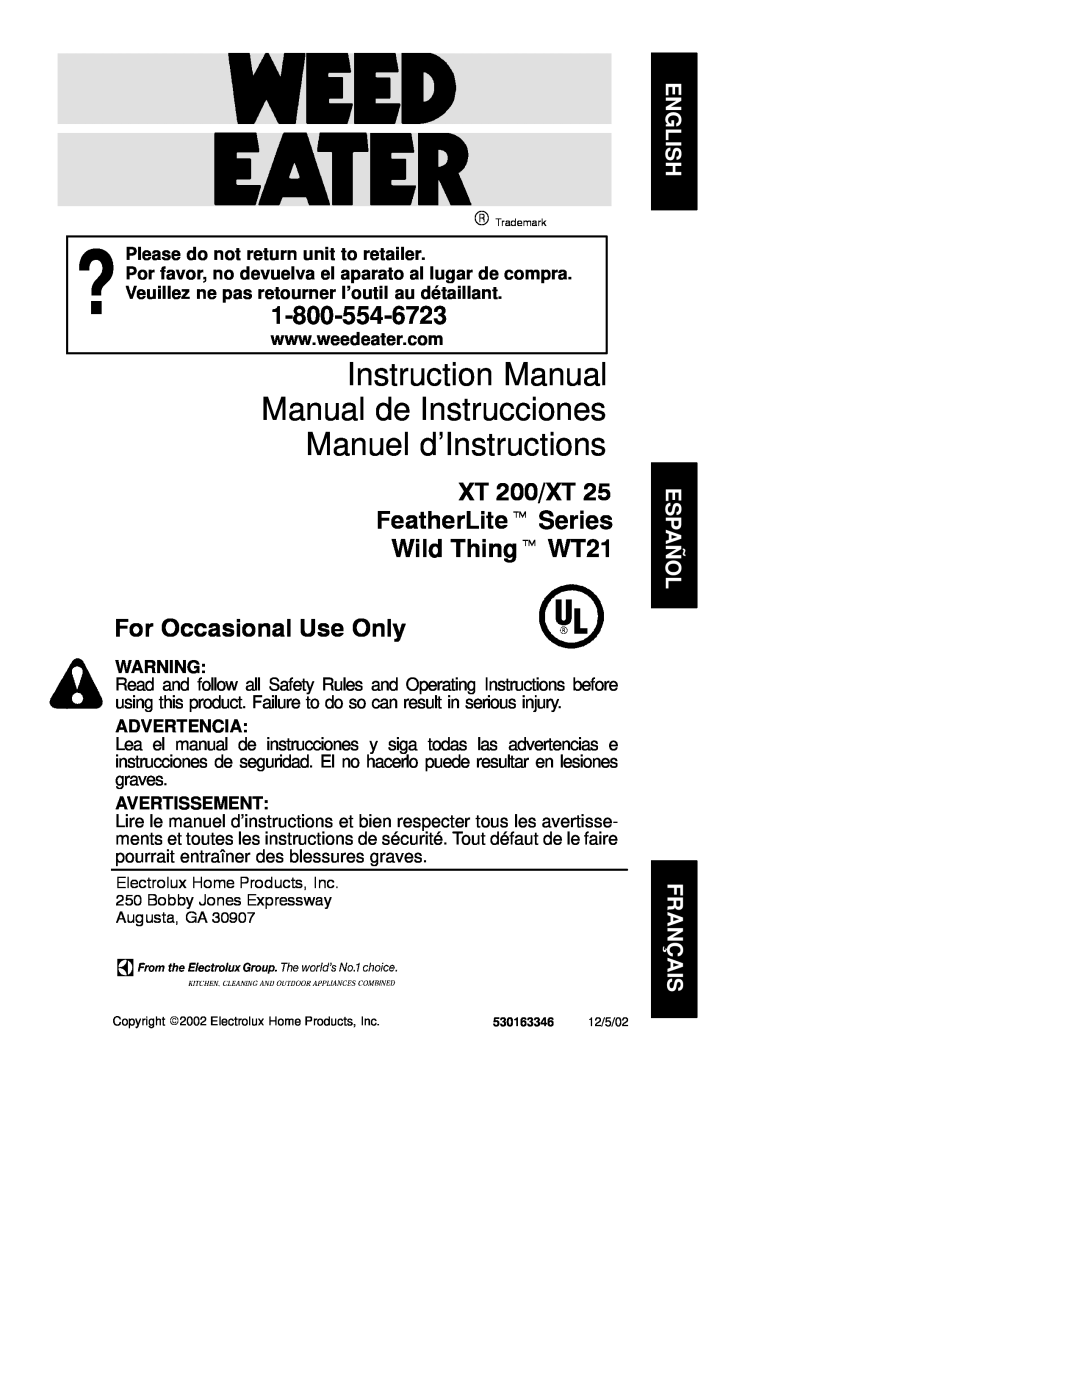 Weed Eater 530163346 instruction manual Please do not return unit to retailer, Advertencia, Avertissement 